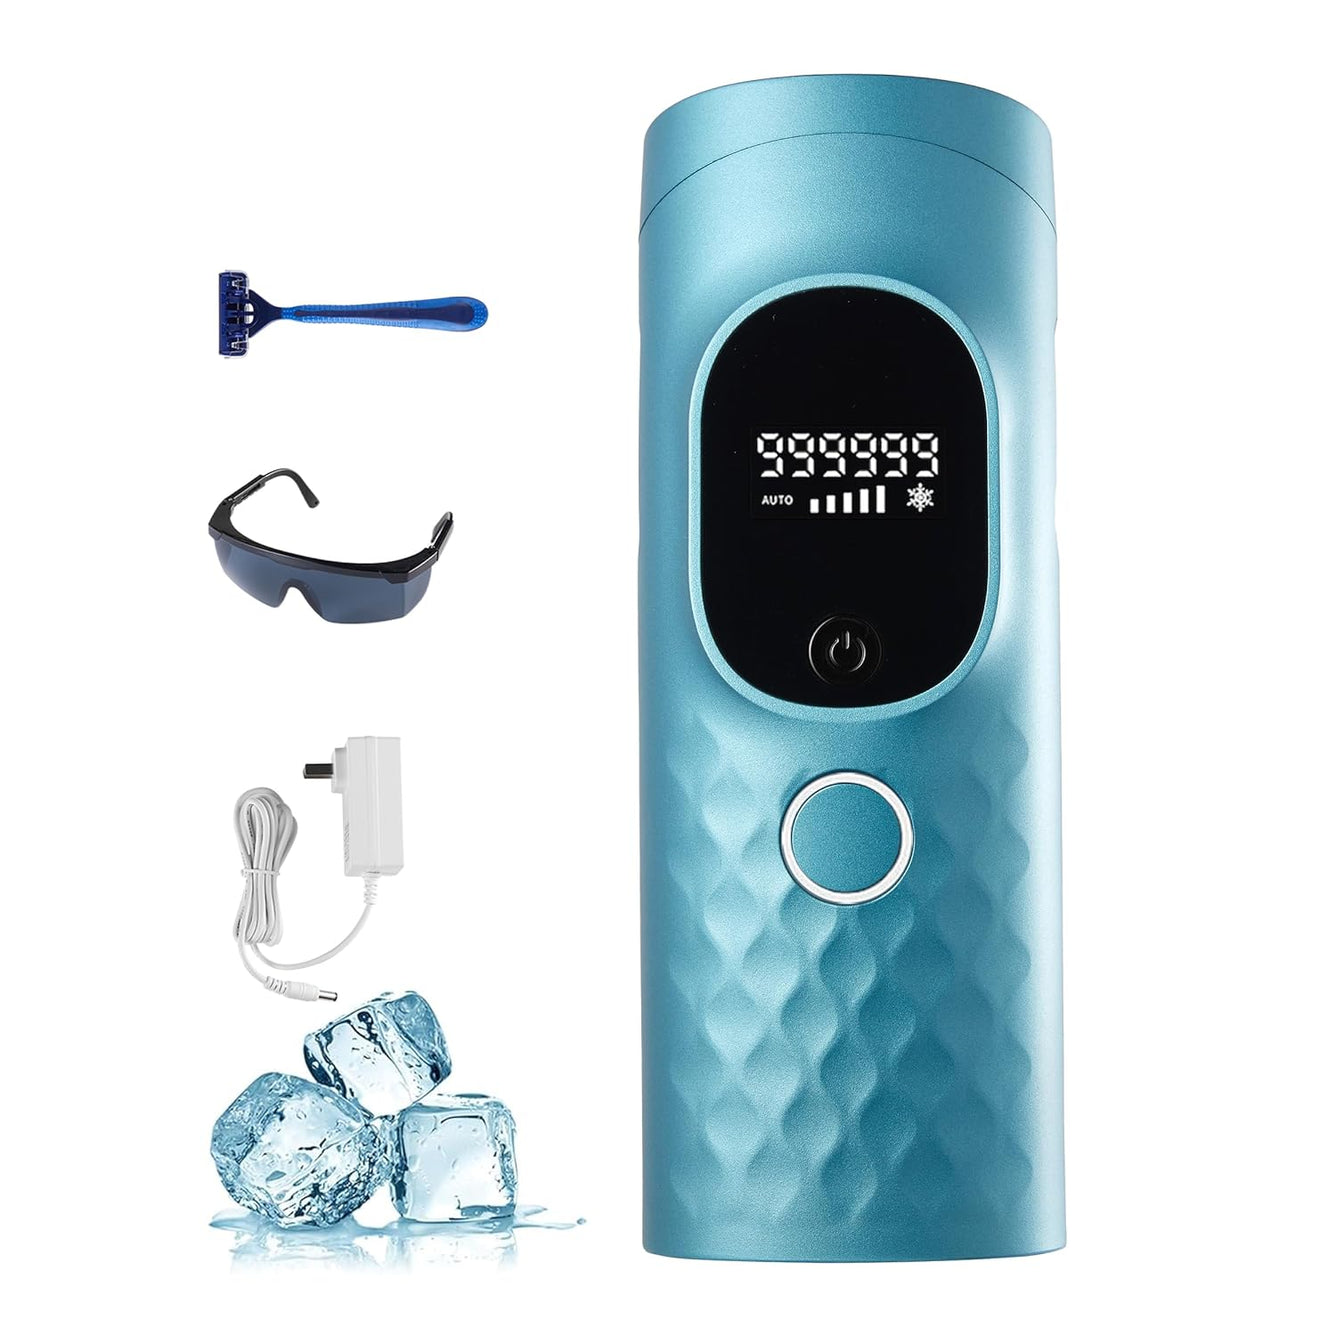 Laser Hair Removal for Women and Men, 5 Gears Hair Removal Device, IPL Hair Removal with Ice-Cooling System for Long-Lasting Result, 999,997 Times for Body & Face At-Home Use, FDA Registered